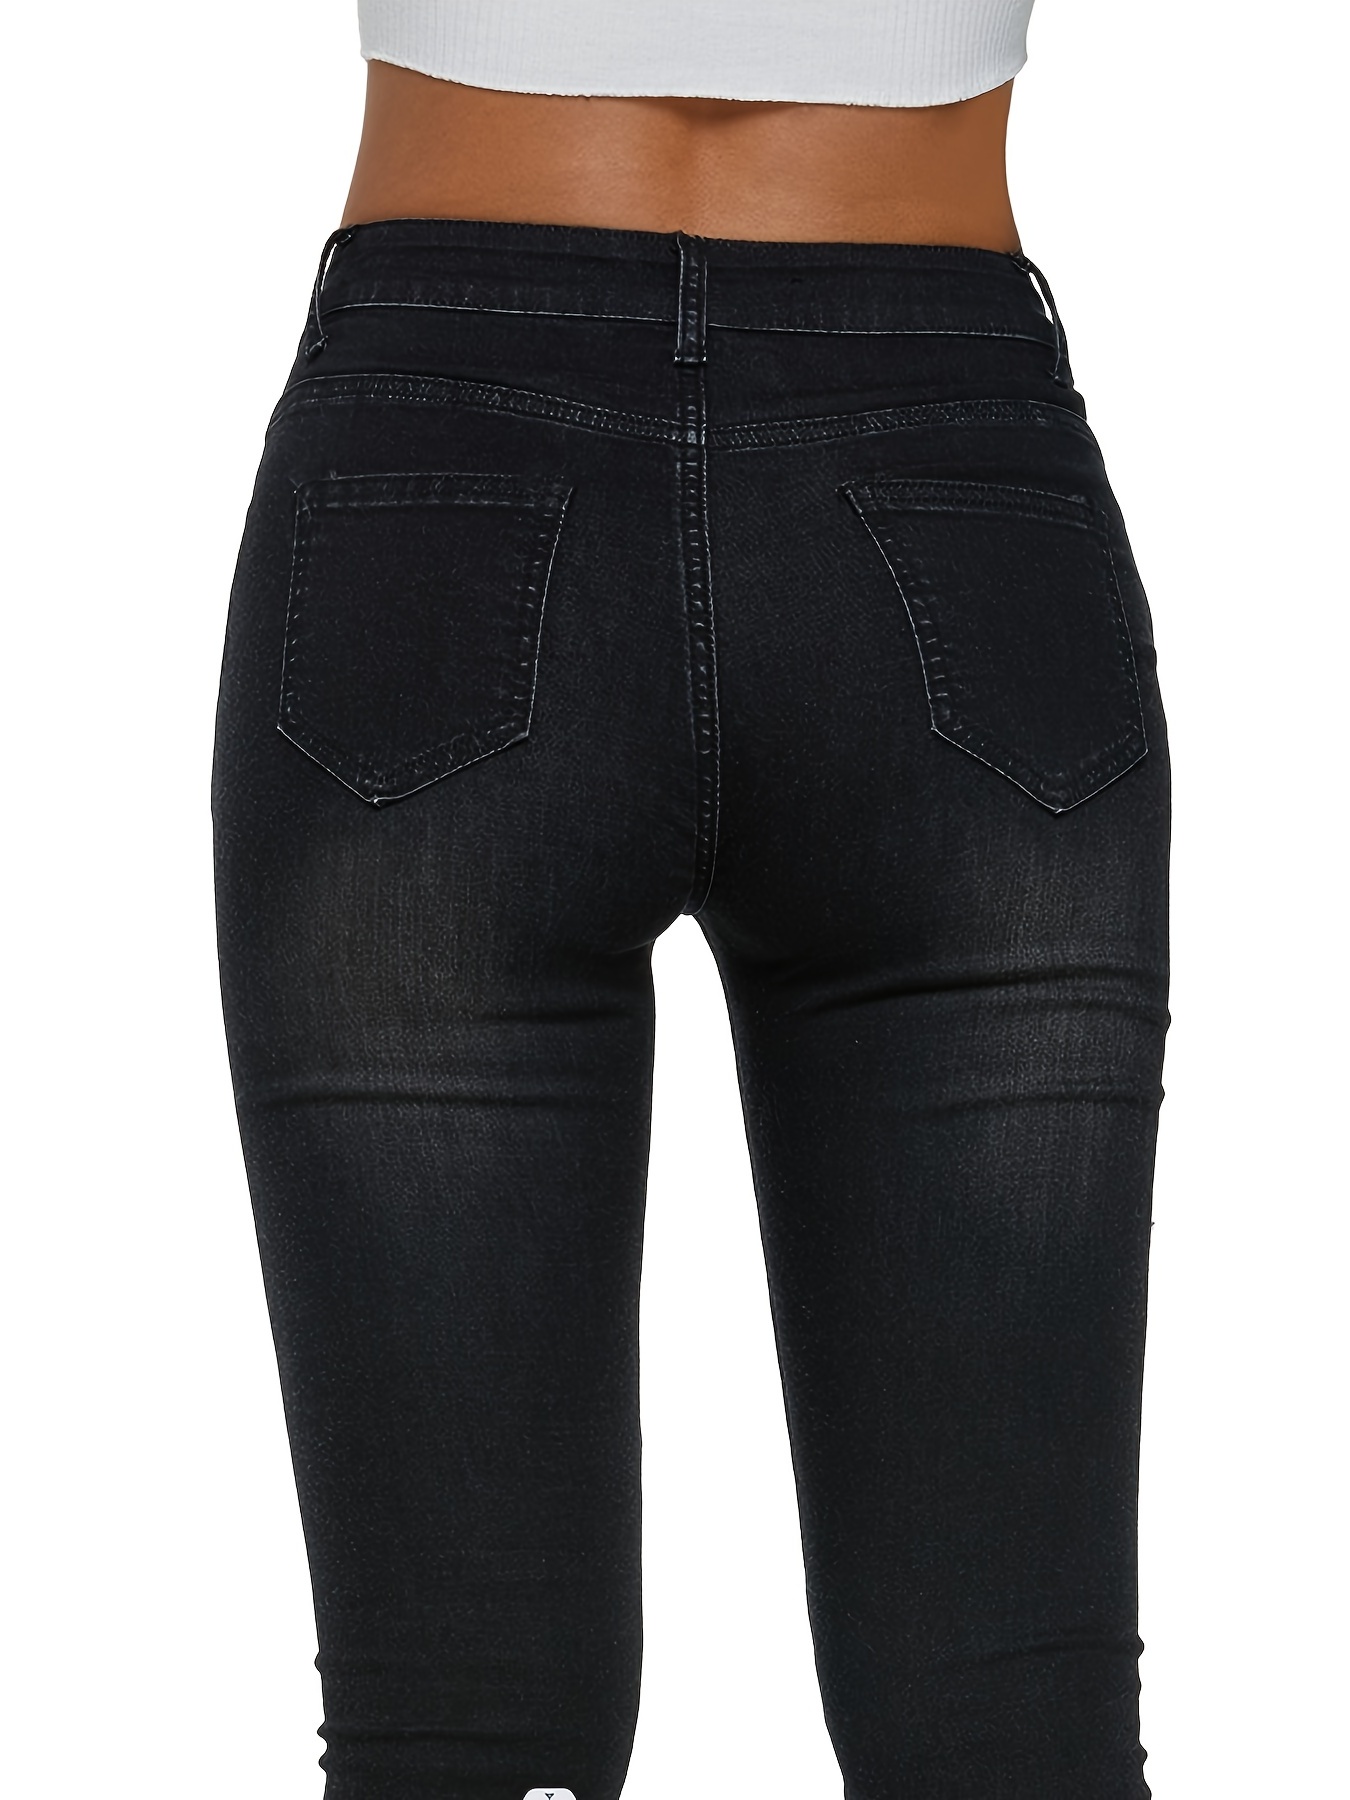 Black High Waisted Butt Lift Skinny Pants - High Rise Stretchy